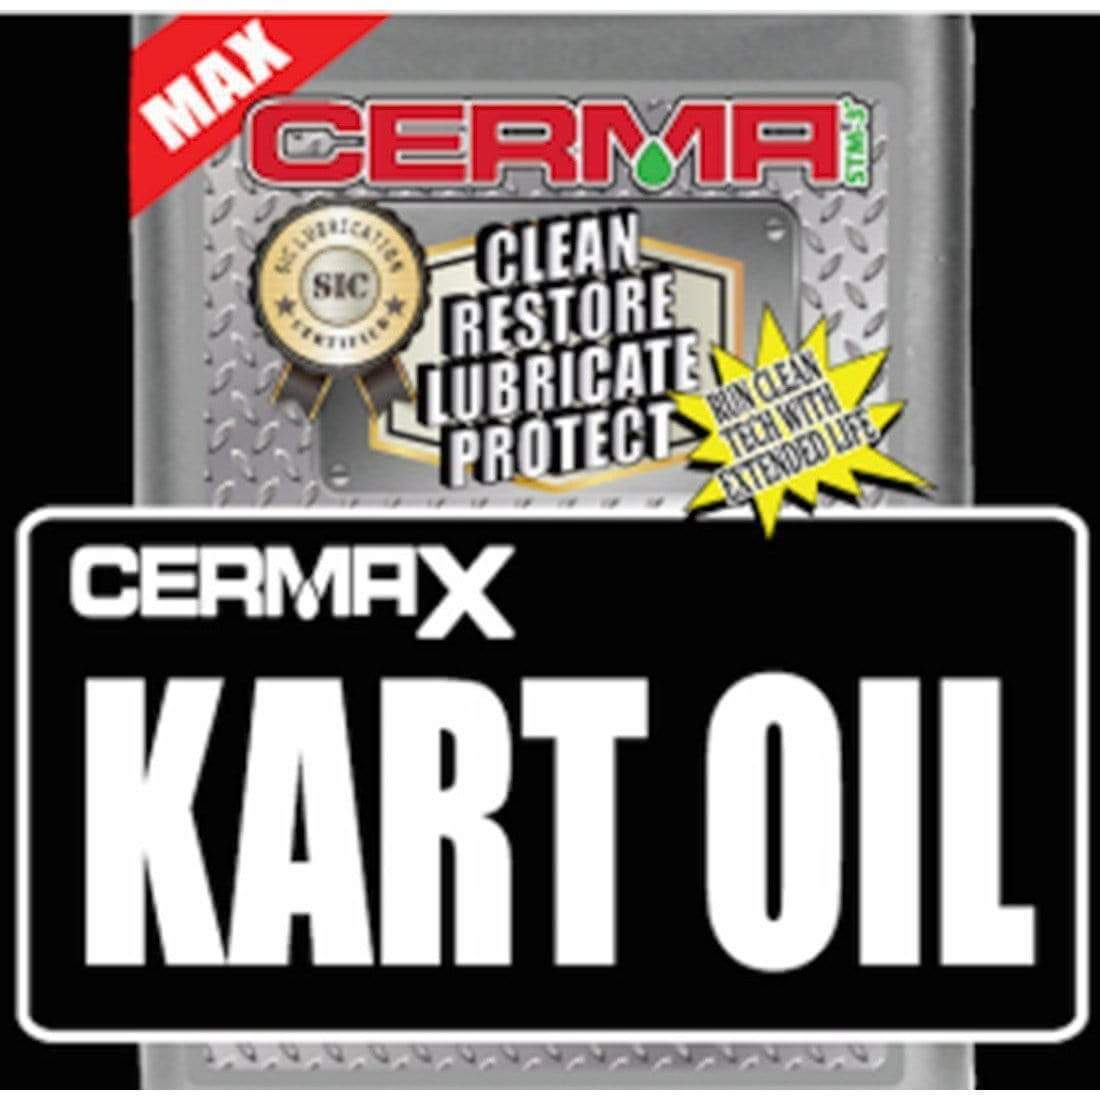 Cermax Ceramic Kart Engine Oil with Cleaning Technology at $87.11 only from cermatreatment.com